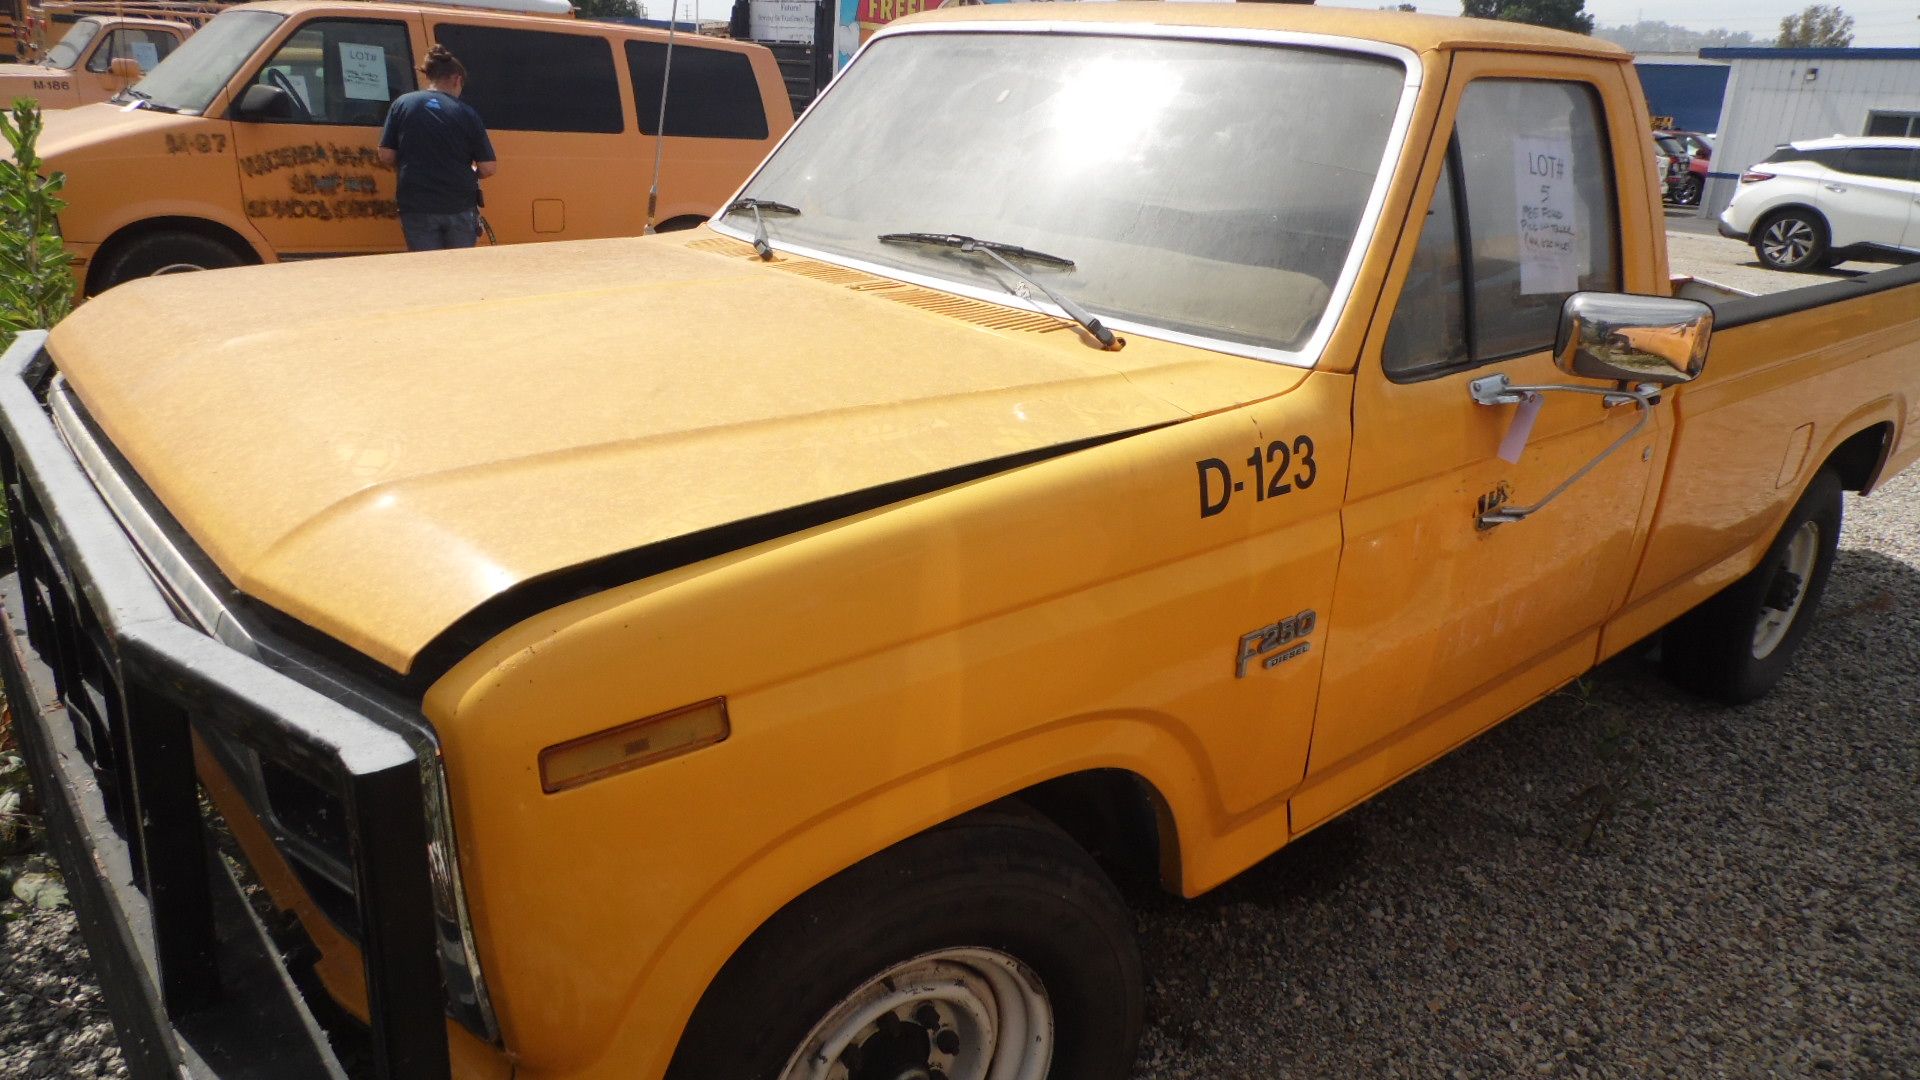 1985 FORD PICK-UP TRUCK (MILEAGE 44,620) (GALE LOCATION) **STARTS UP WITH KEY**